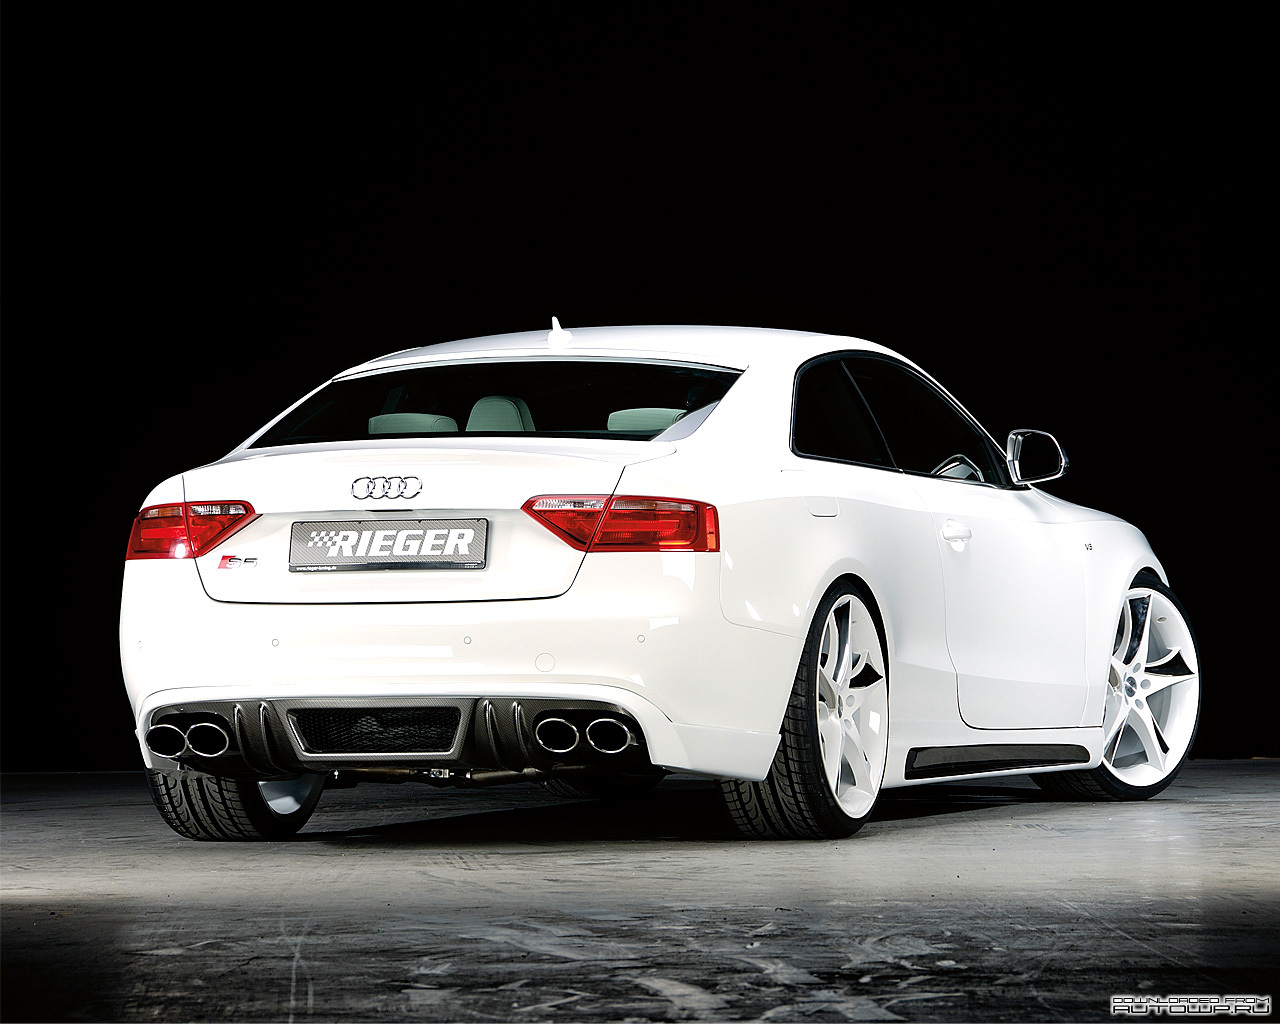 Audi S5 Wallpaper Cars And Pictures Car Image Pics